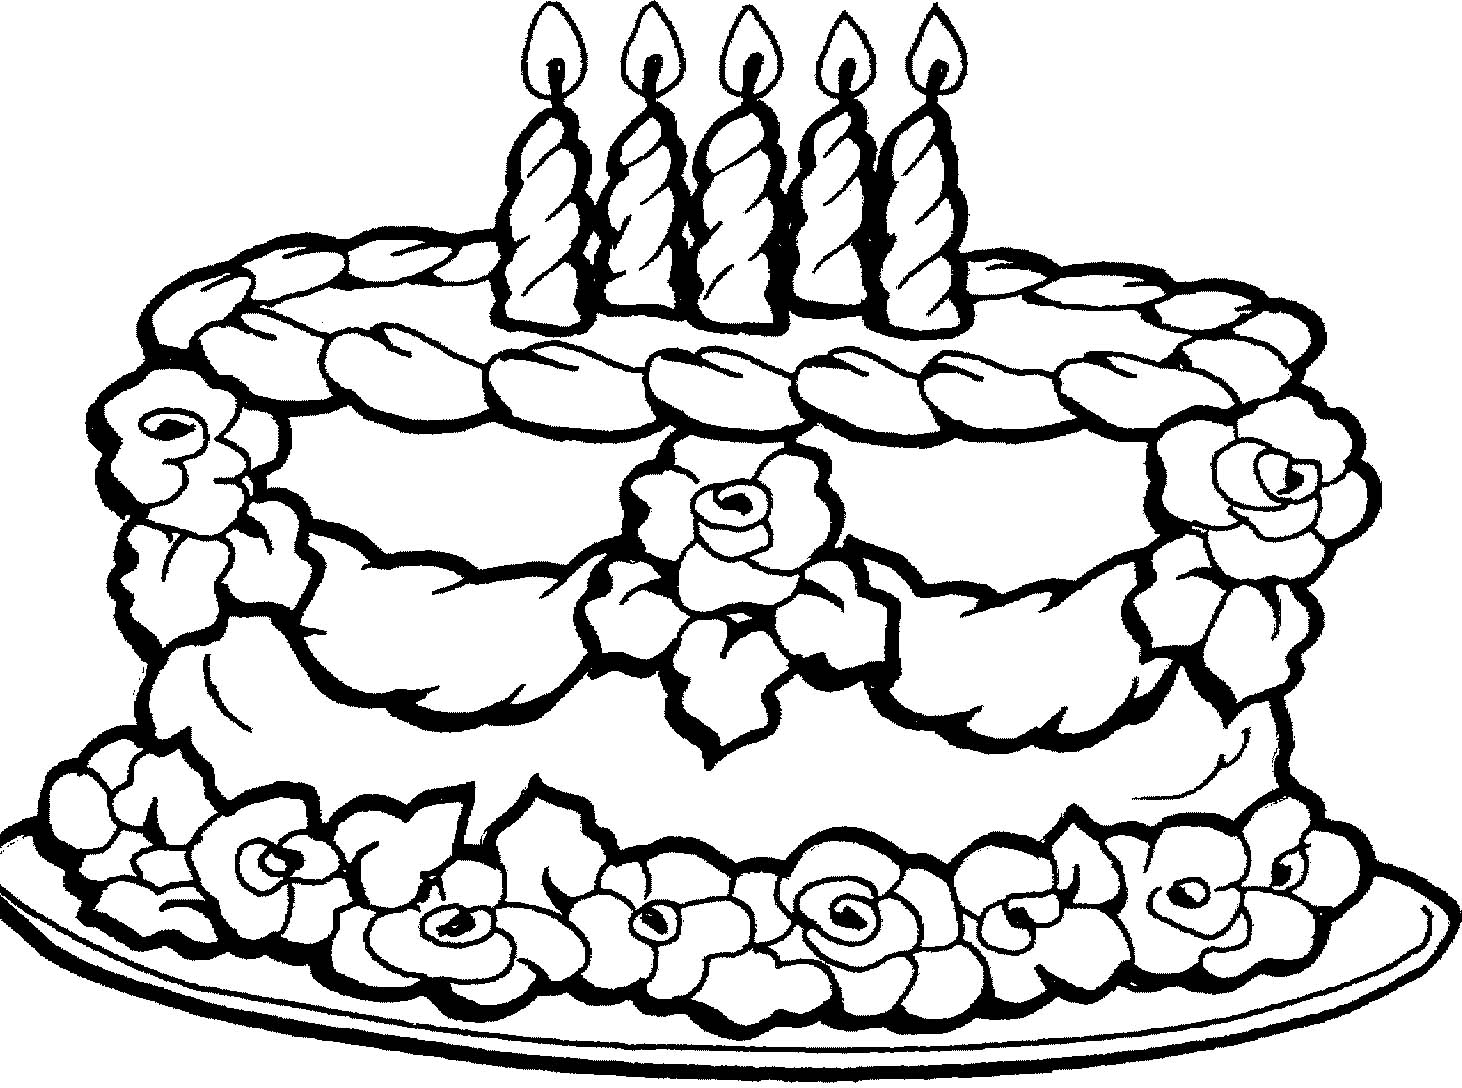 4-best-images-of-monthly-birthday-cake-printables-printable-birthday